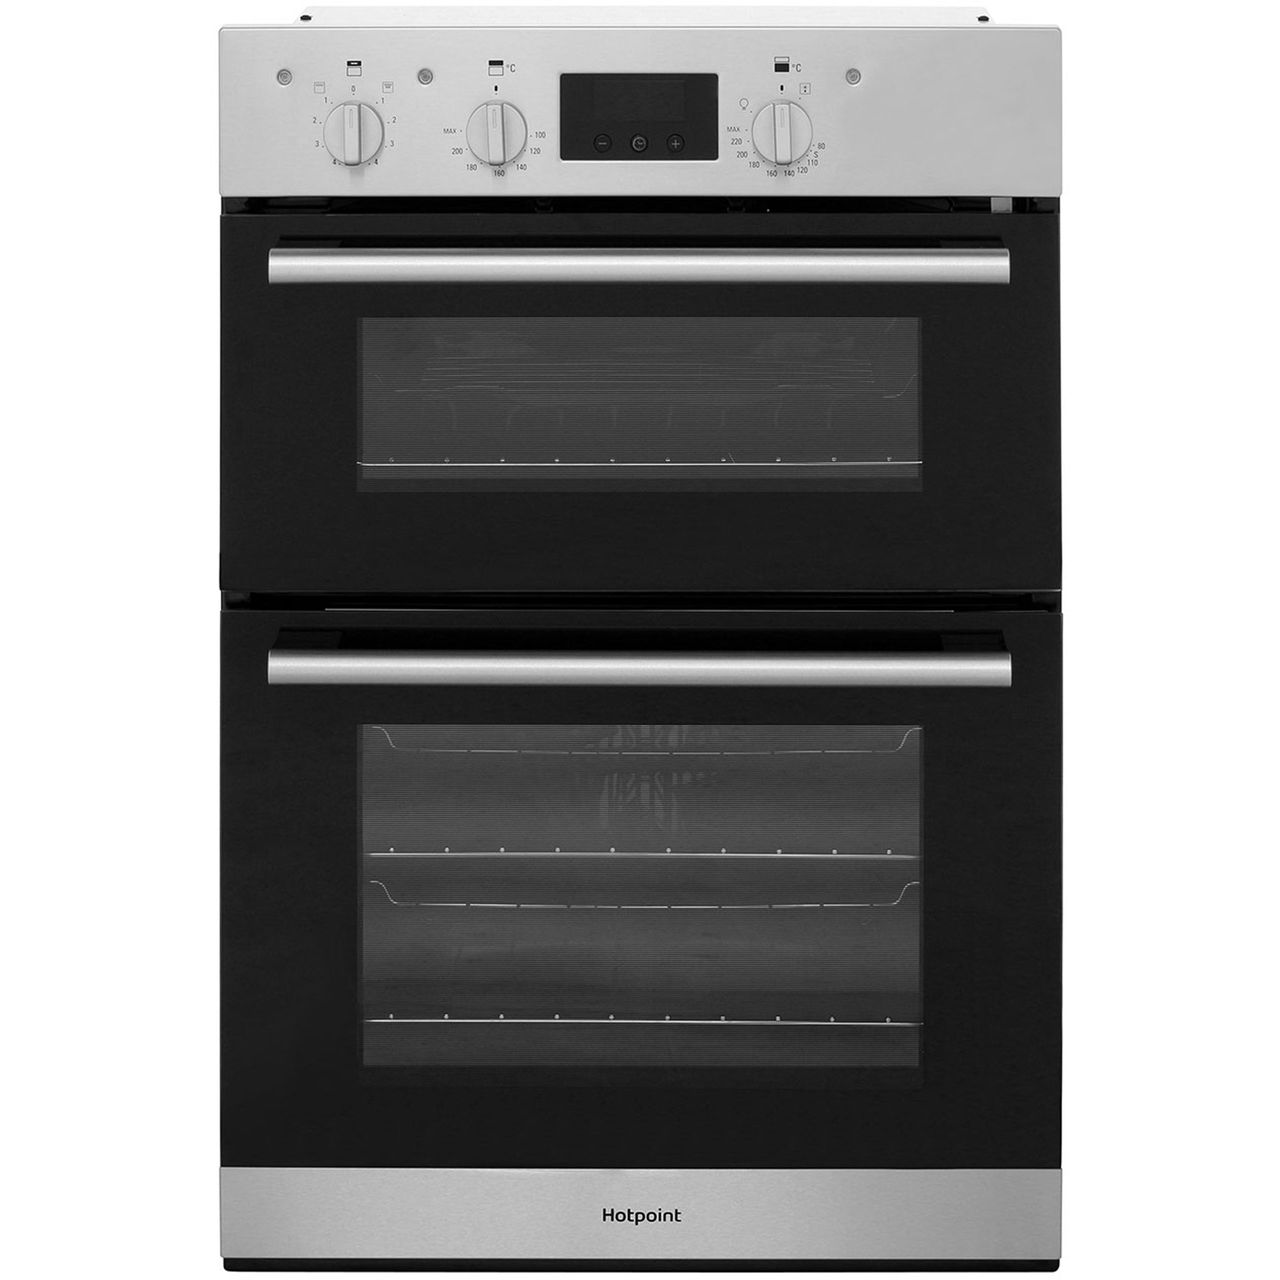 Hotpoint Class 2 Built In Electric Double Oven - Stainless Steel - A/A Rated